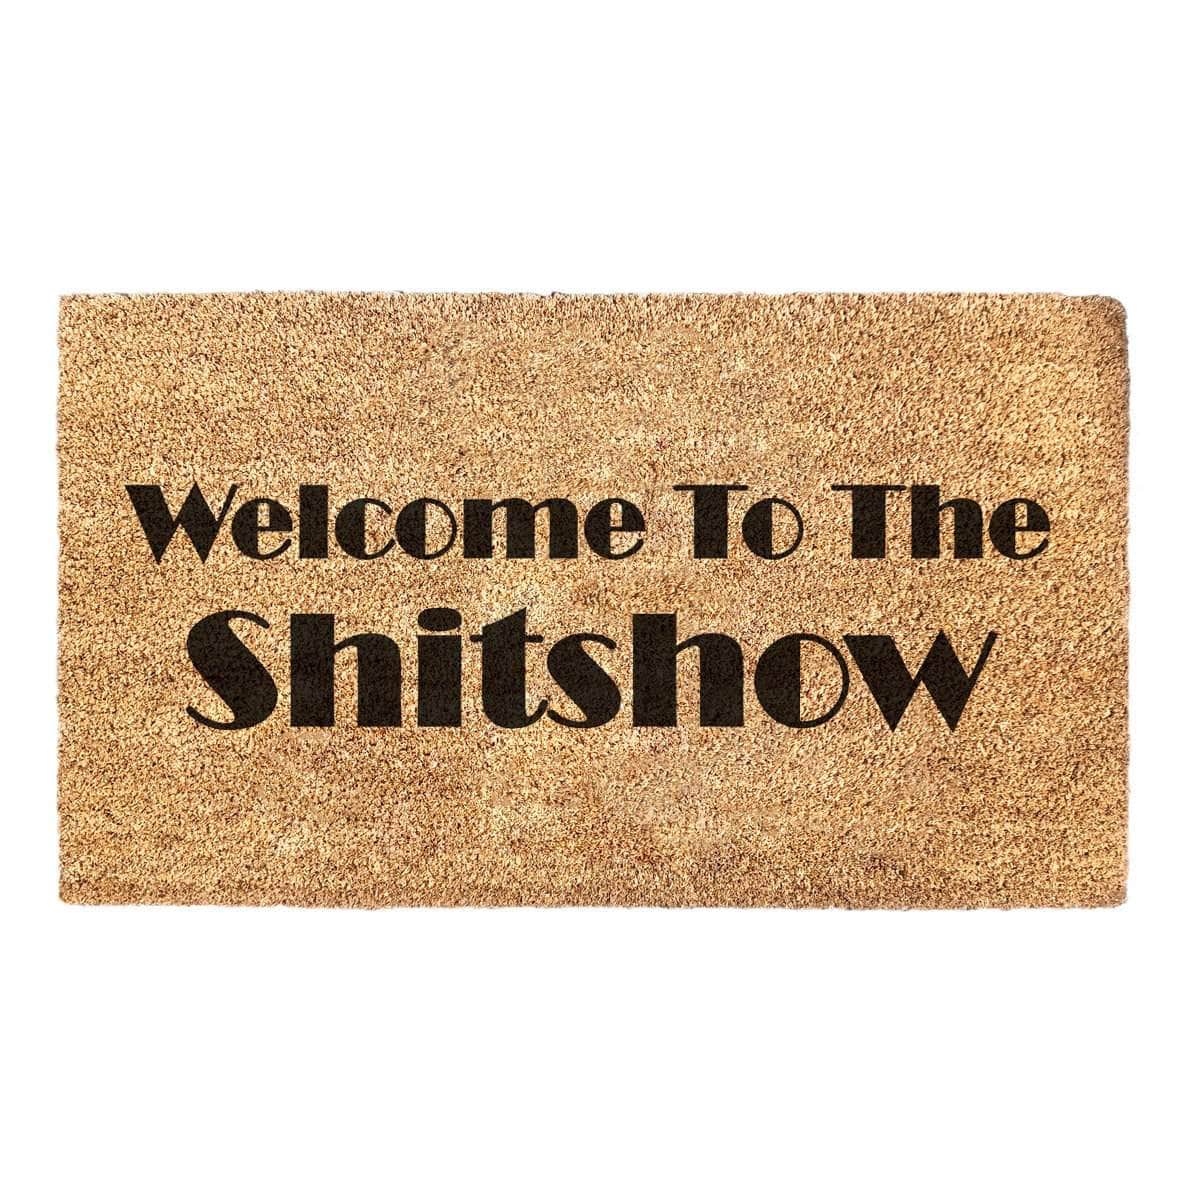 Welcome To The Shitshow - Funny Doormat